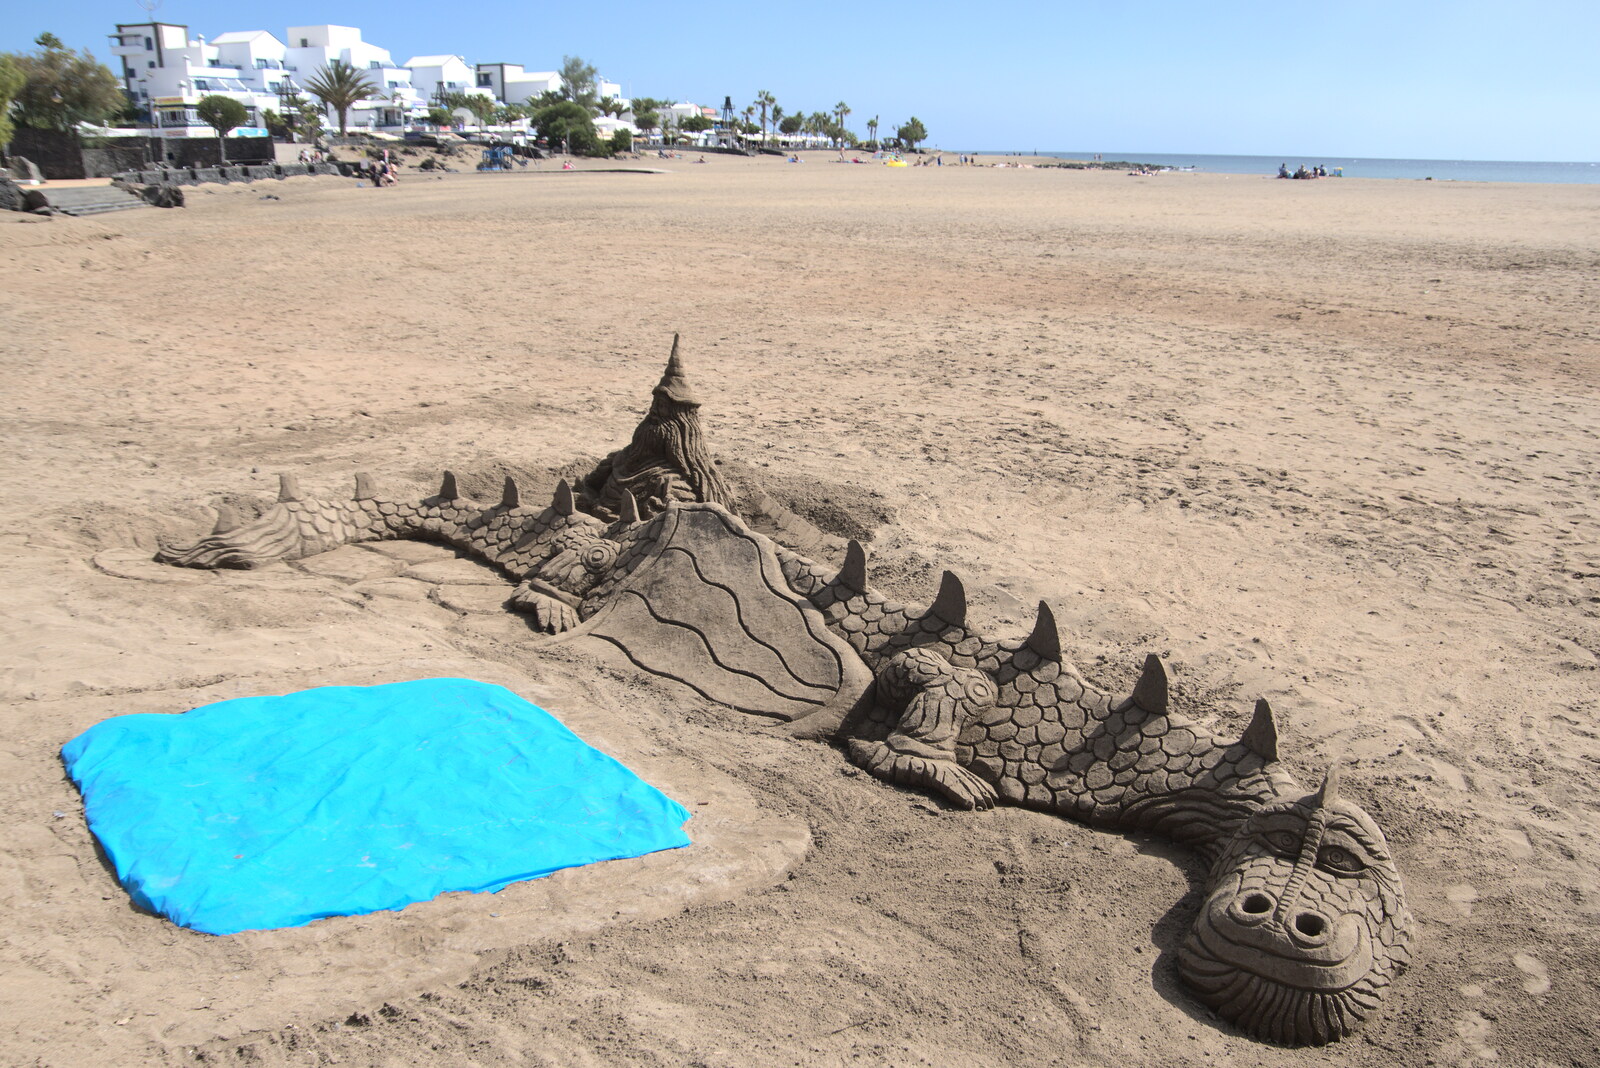 There's a cool sand sculpture on Los Pocillos from Five Days in Lanzarote, Canary Islands, Spain - 24th October 2021